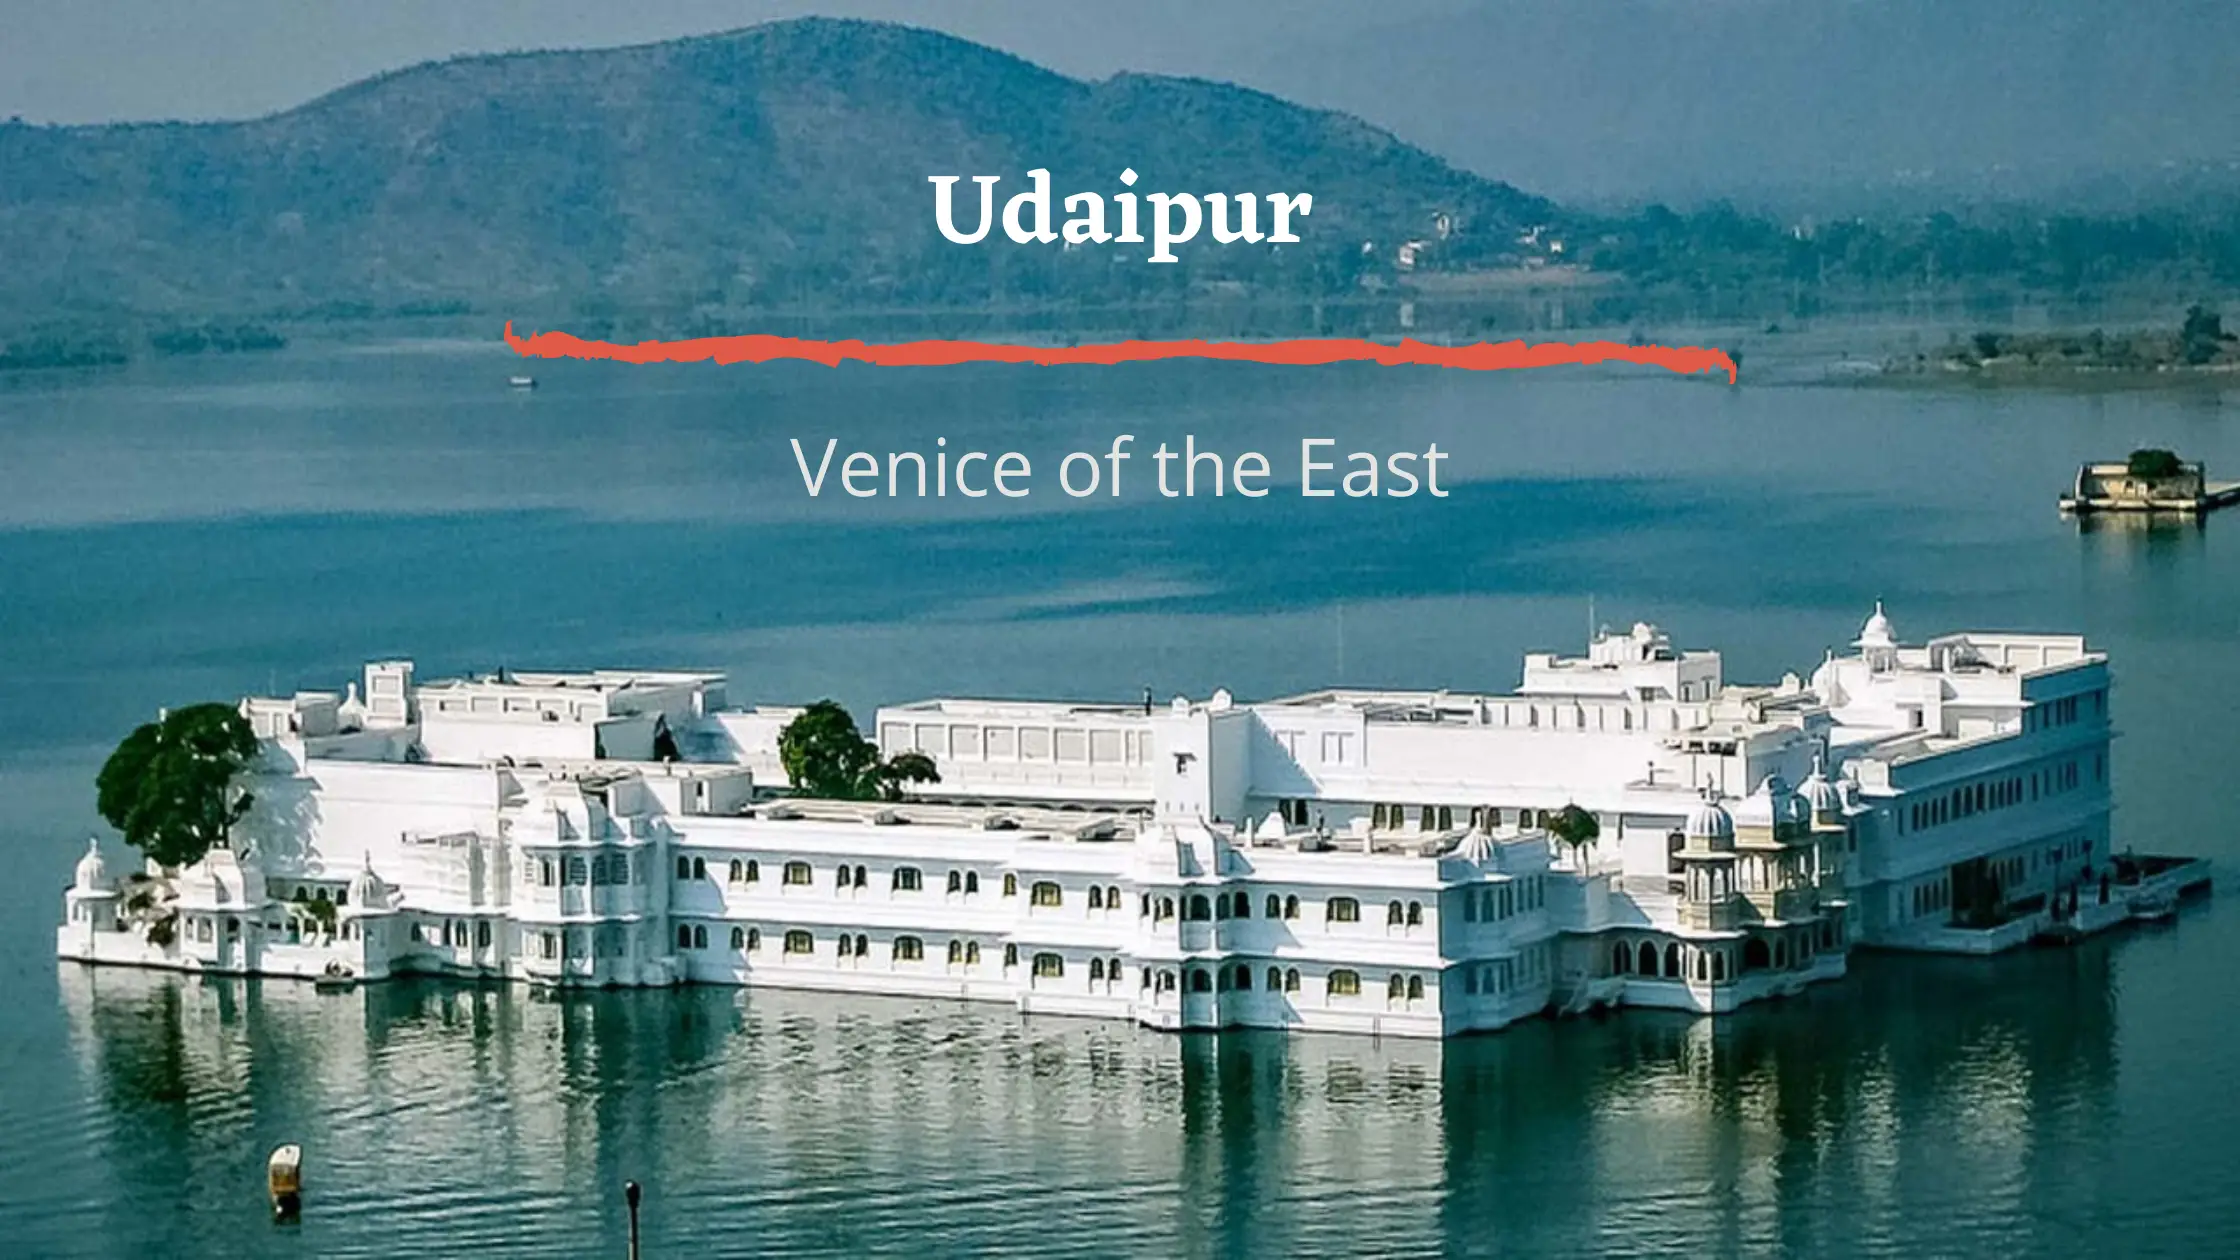 why udaipur is called venice of east